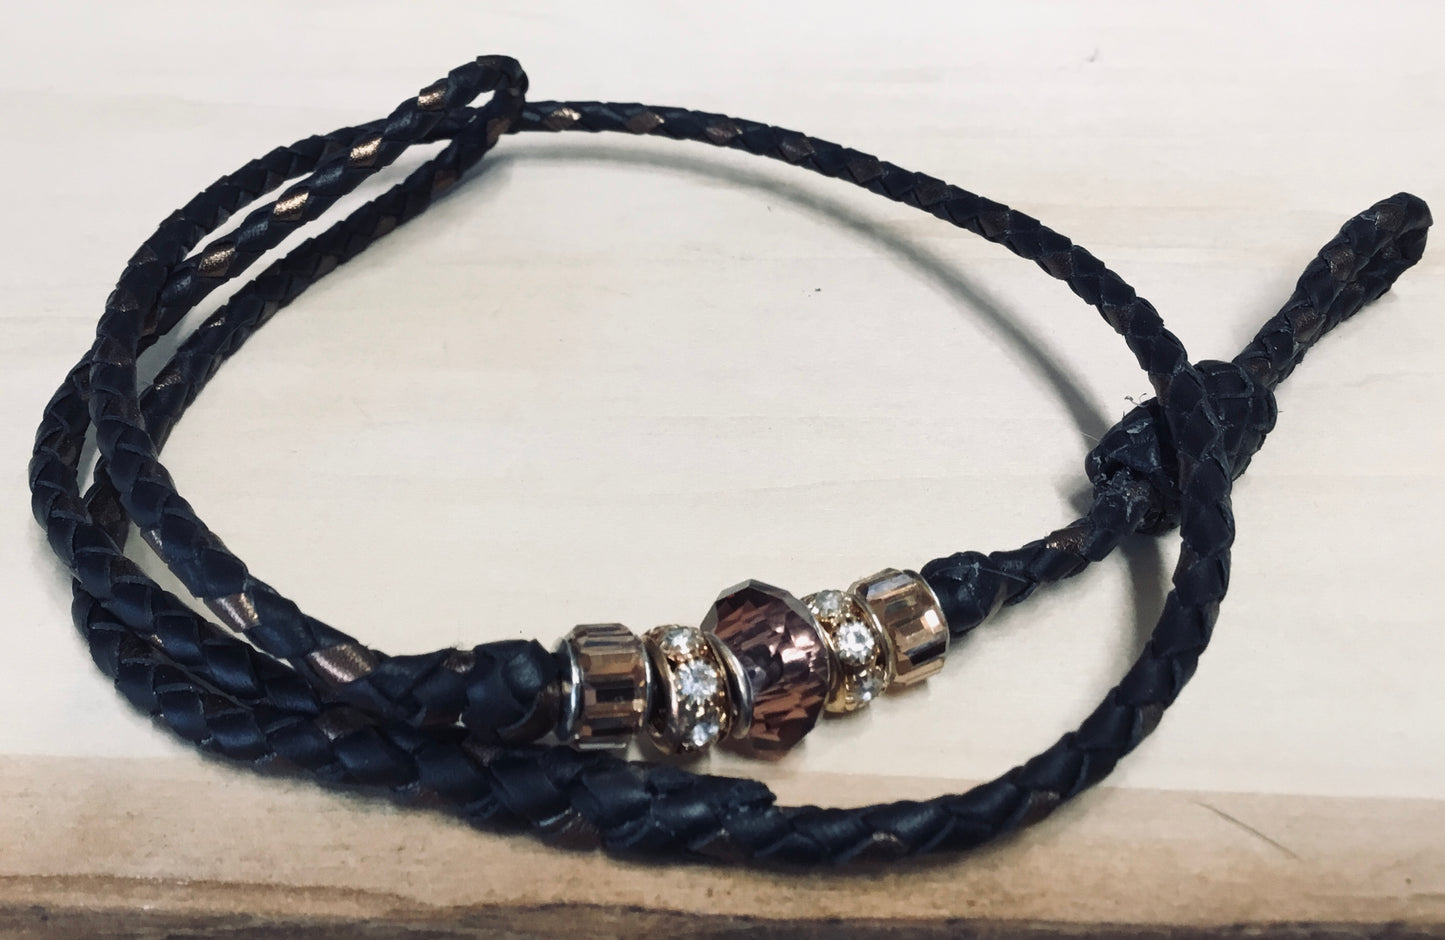 Show Leash - Hand braided Kang@roo Leather